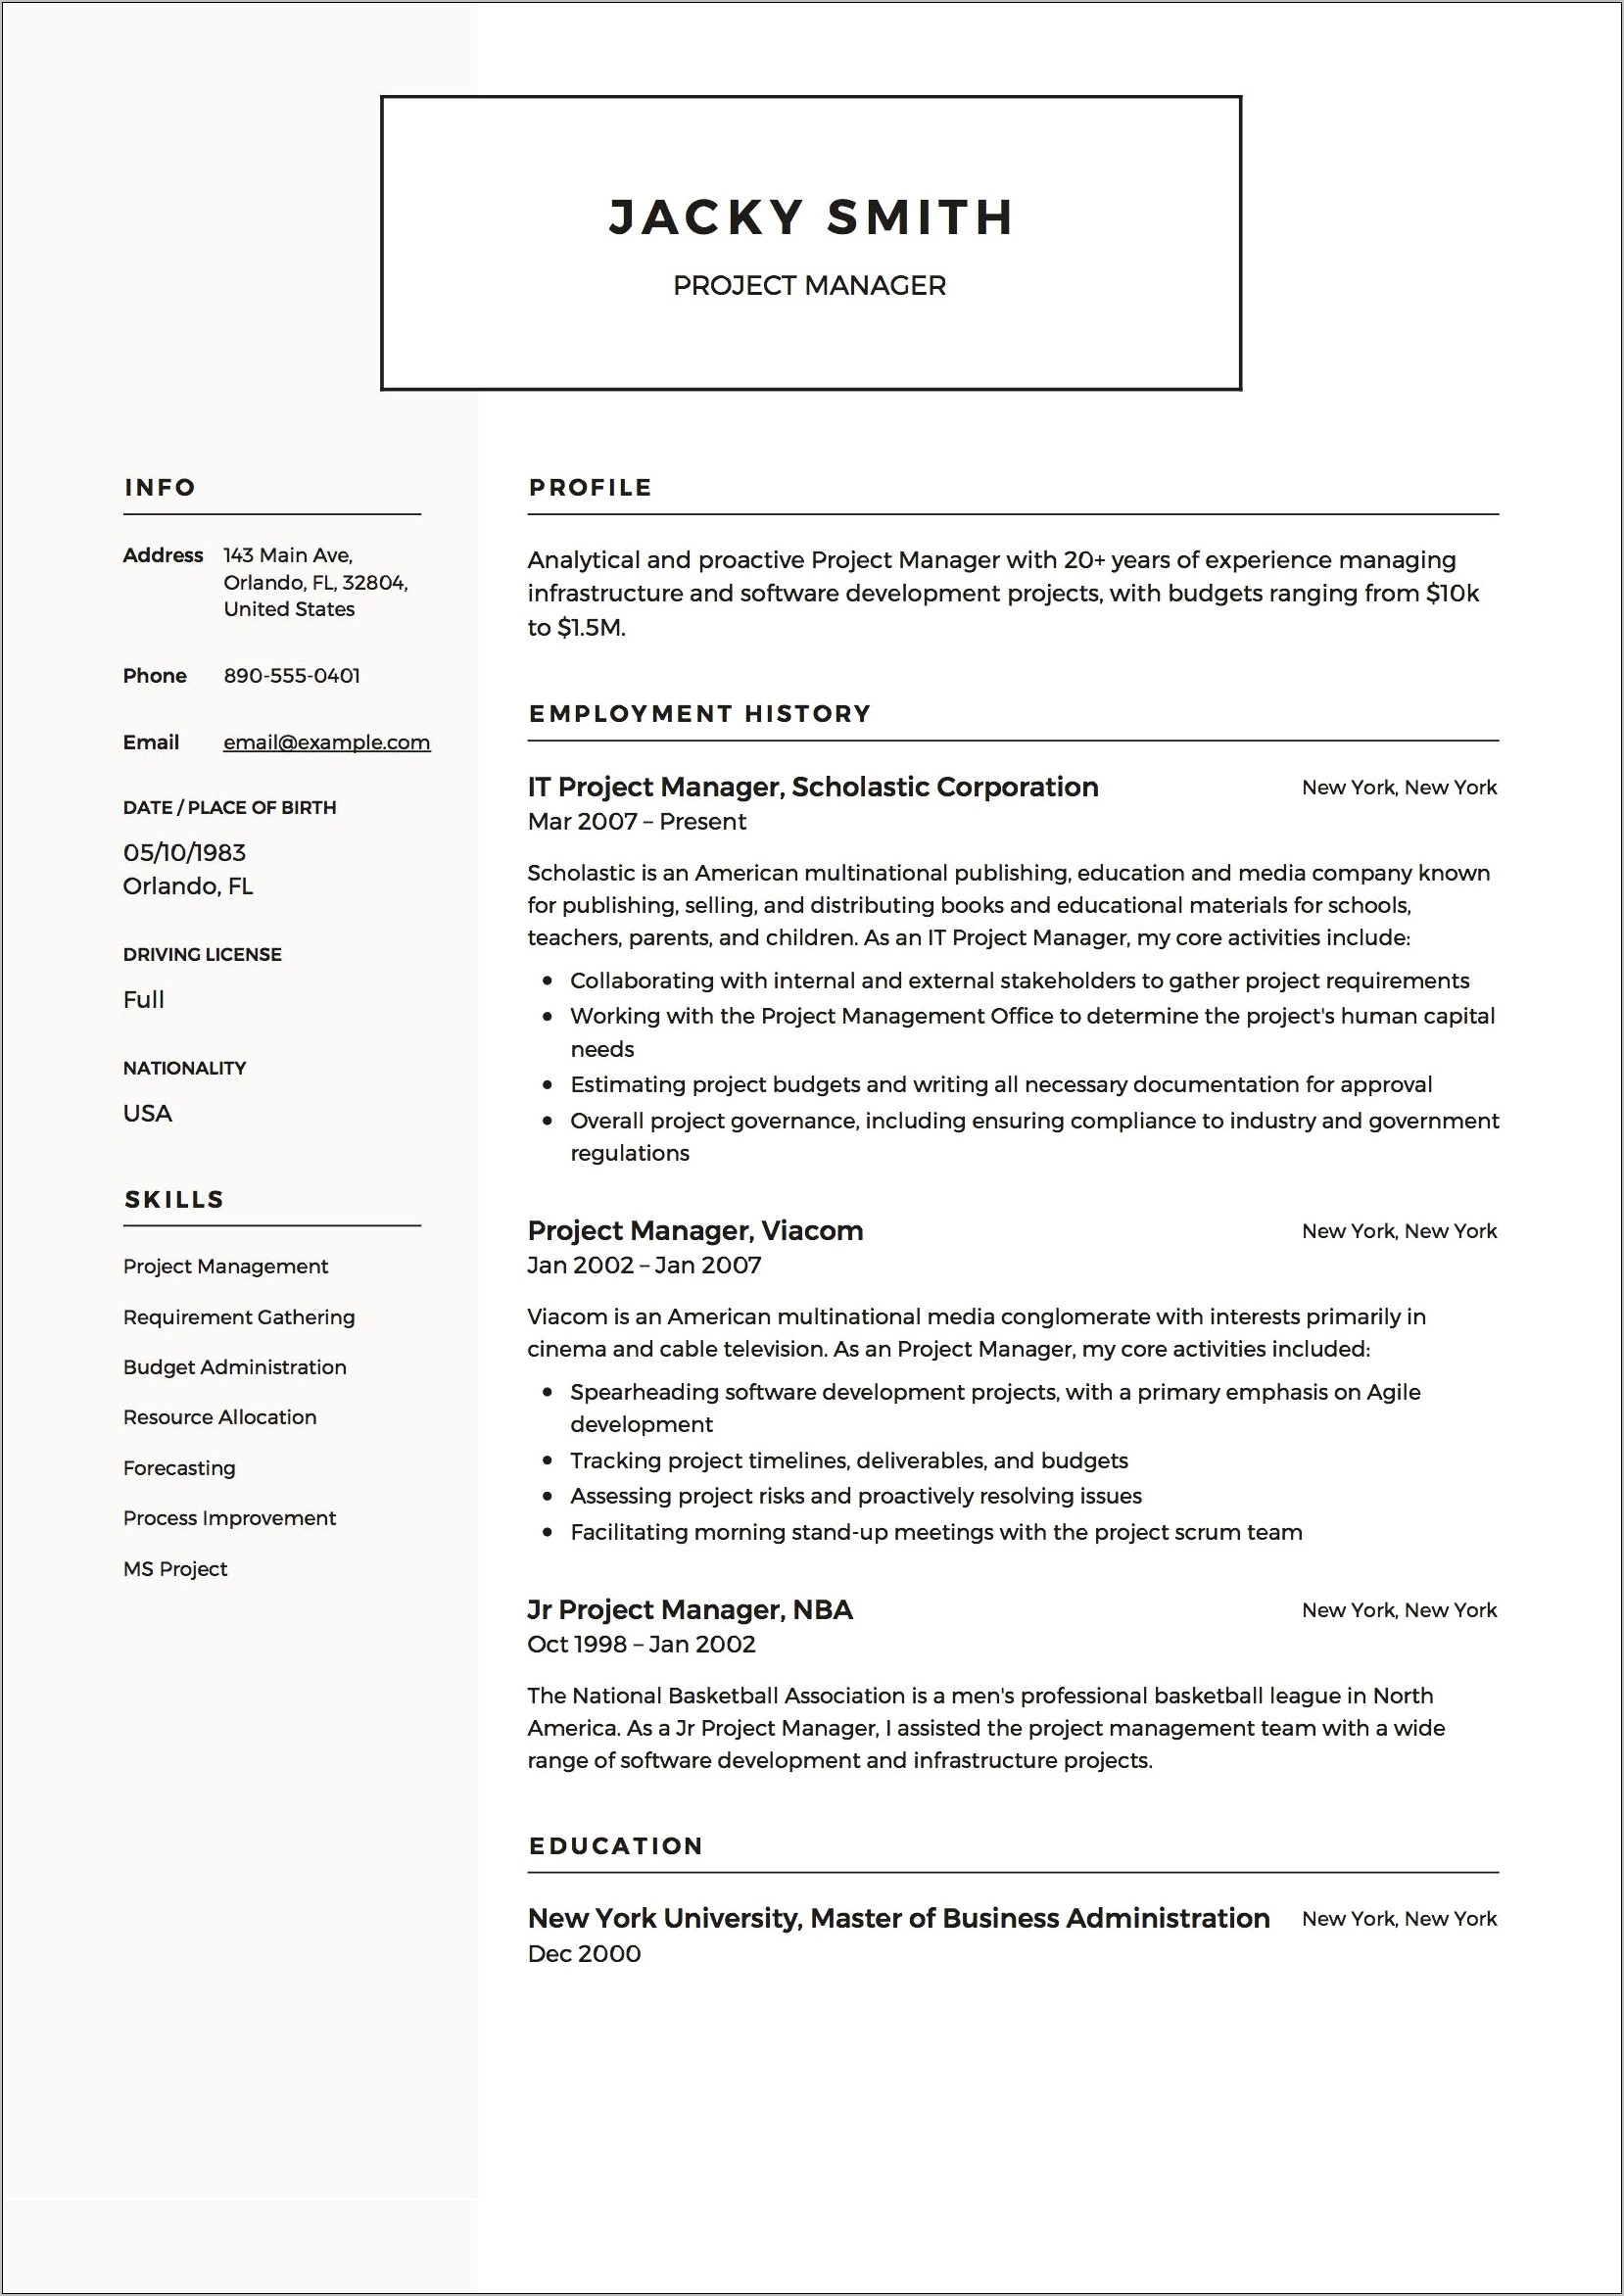 Document Review Project Manager Resume